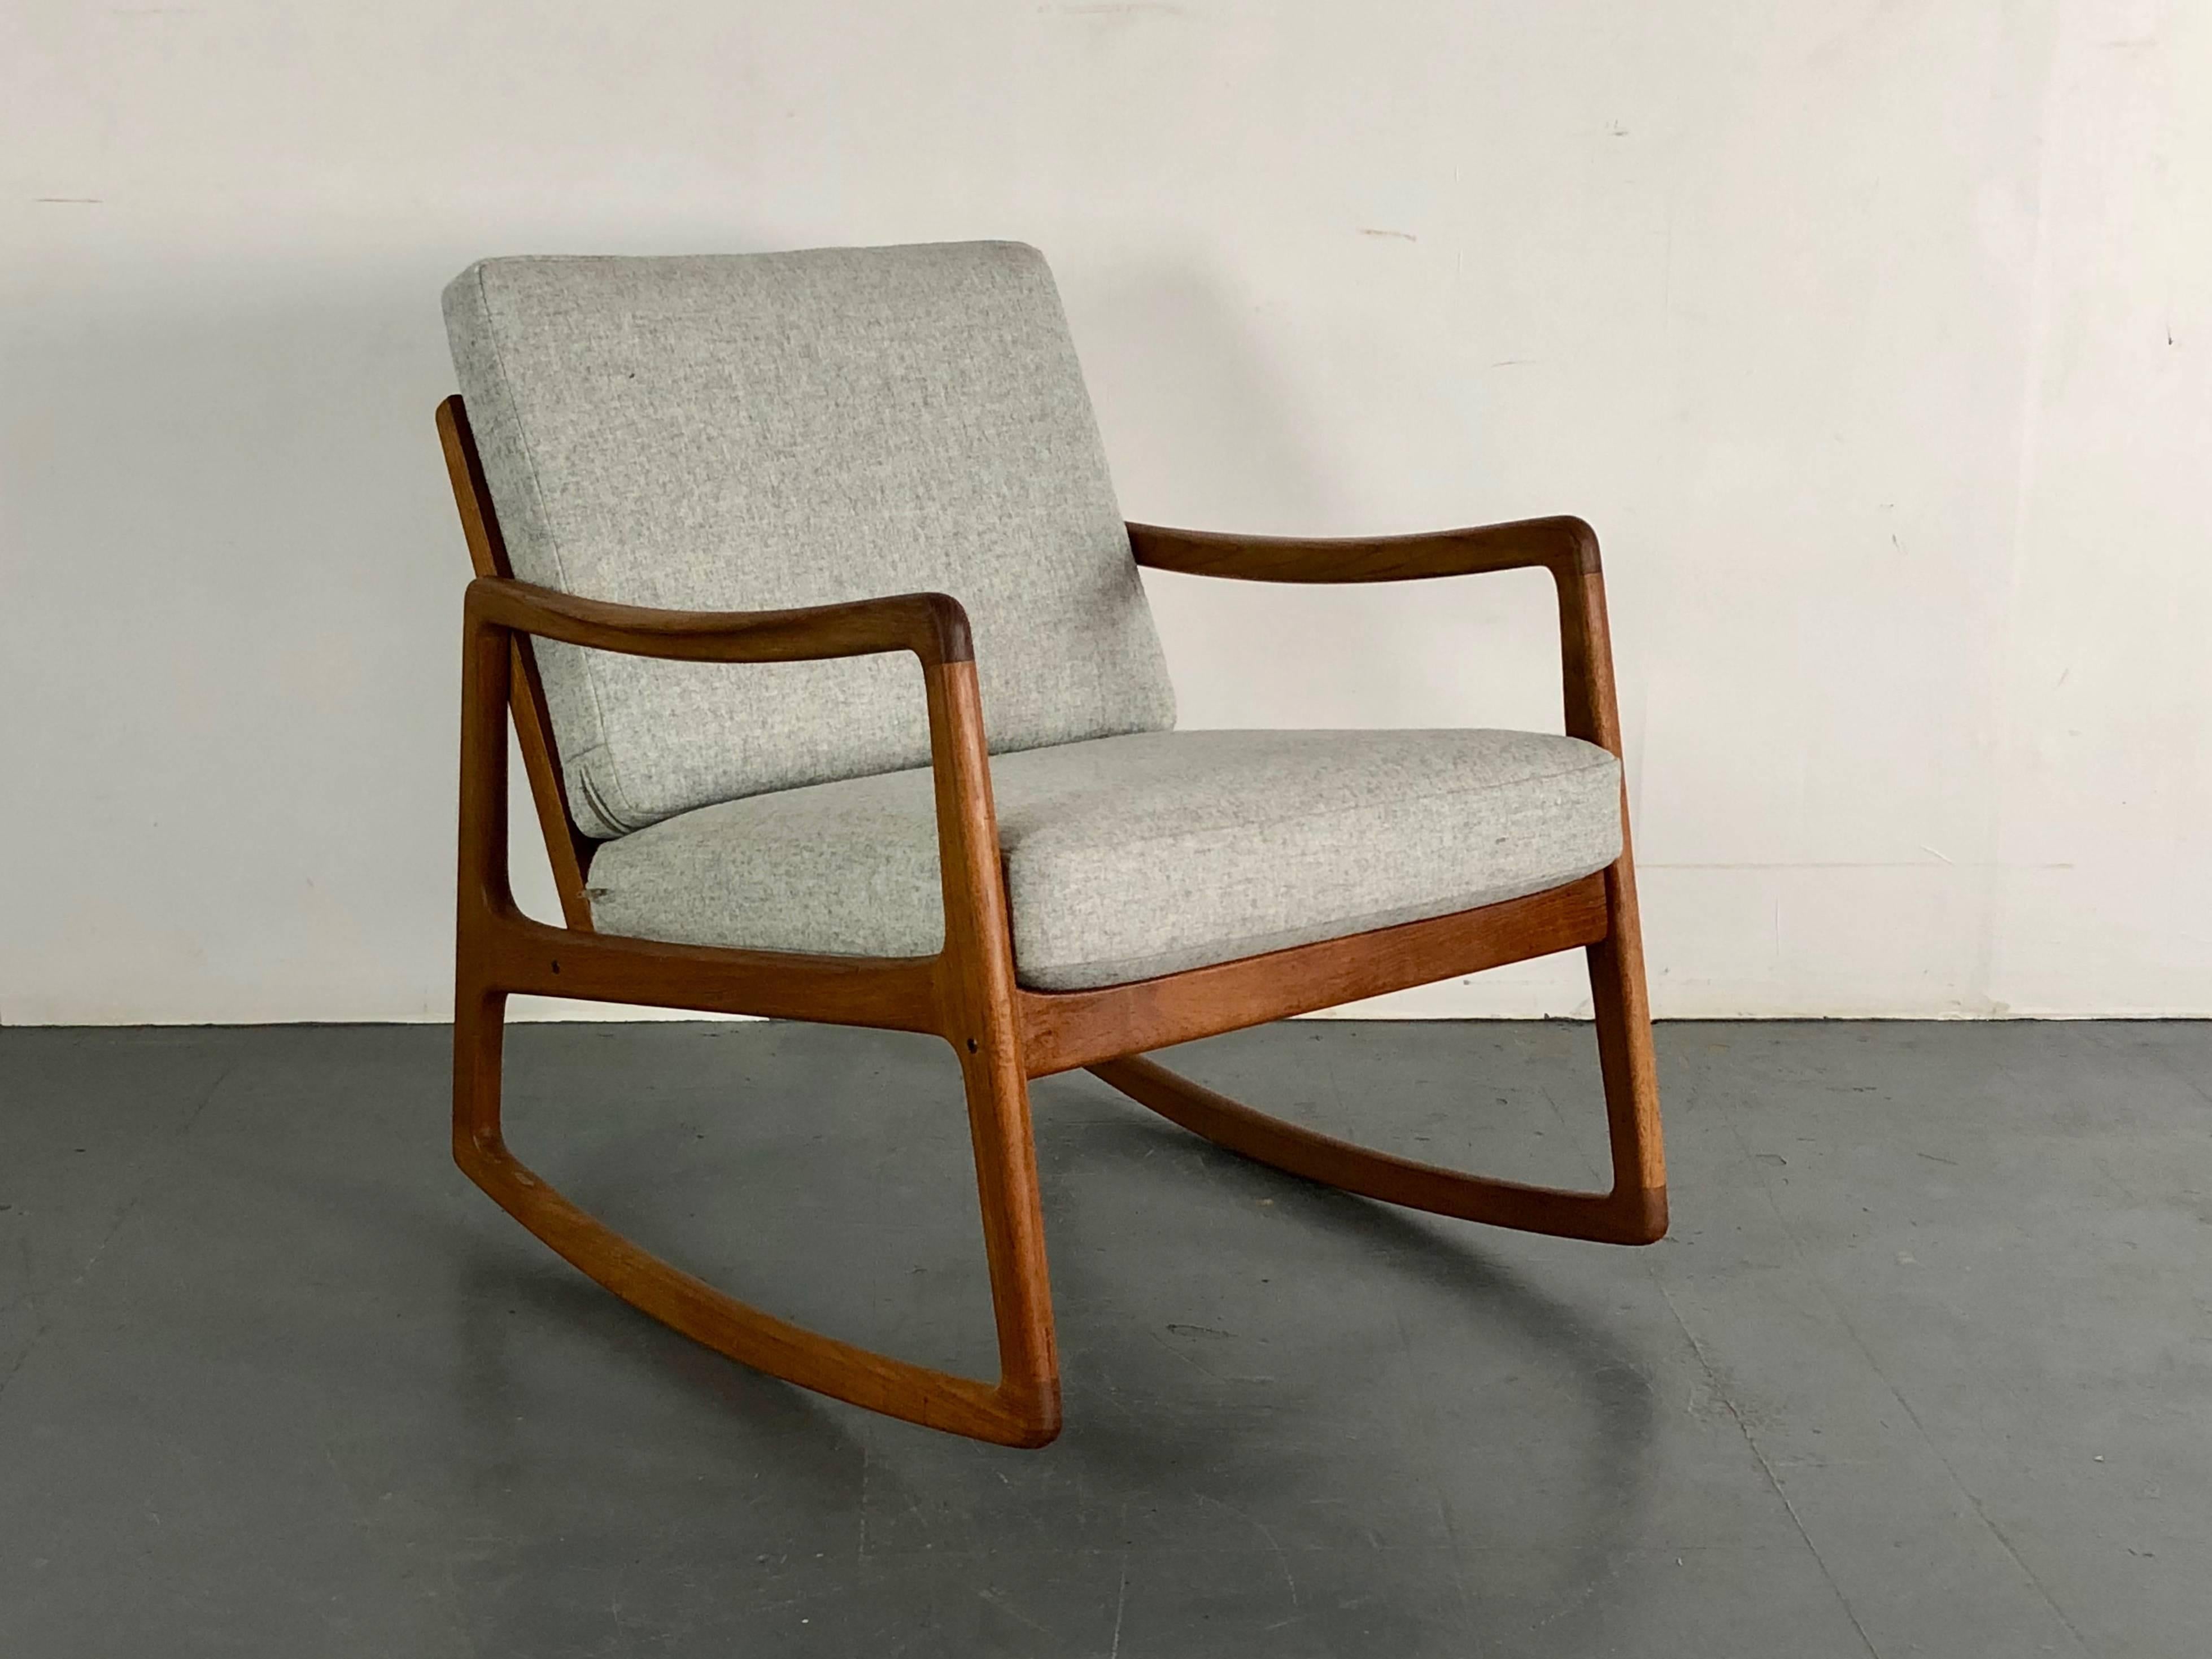 1950s solid teak rocking chair designed by Ole Wanscher for France & Son, Denmark.

With newly upholstered cushions in gorgeous grey Abraham Moon pure new wool.

Approximate dimensions:

Width: 61cm

Height: 76cm

Depth: 80cm

Seat